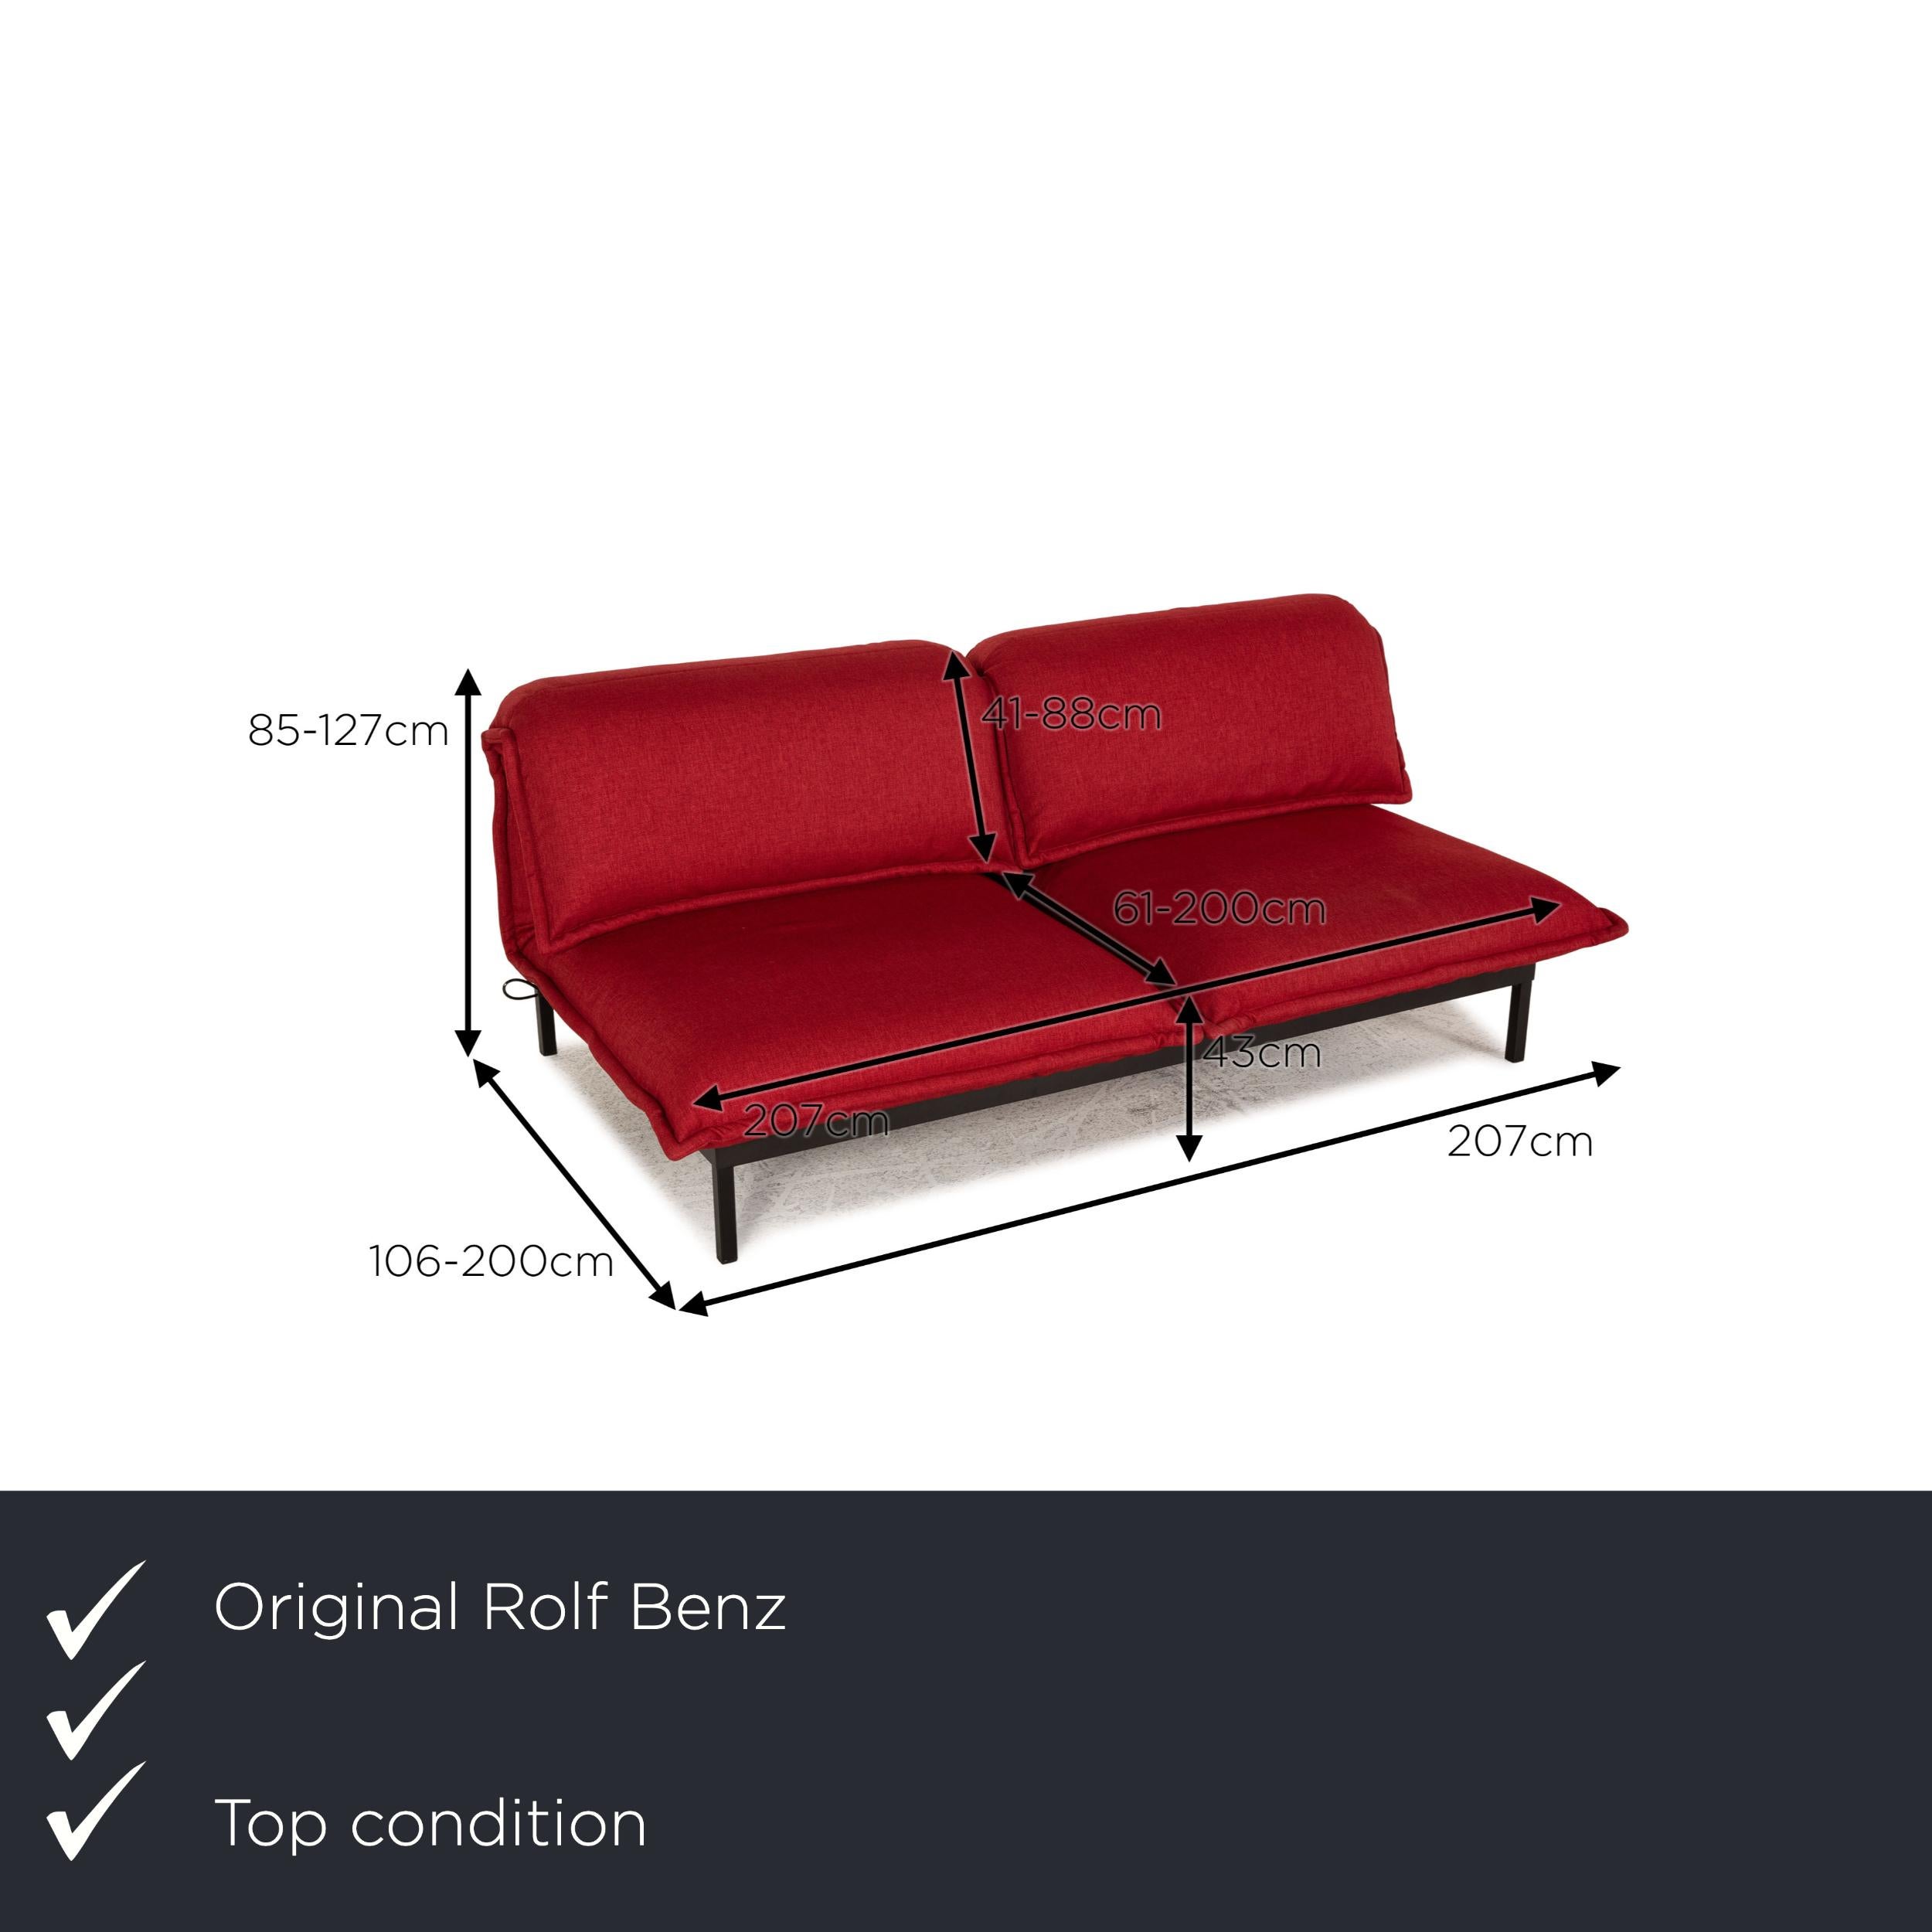 We present to you a Rolf Benz Nova fabric sofa red two-seater function relax function.

Product measurements in centimeters:

depth: 106
width: 207
height: 85
seat height: 43
rest height: 
seat depth: 61
seat width: 207
back height: